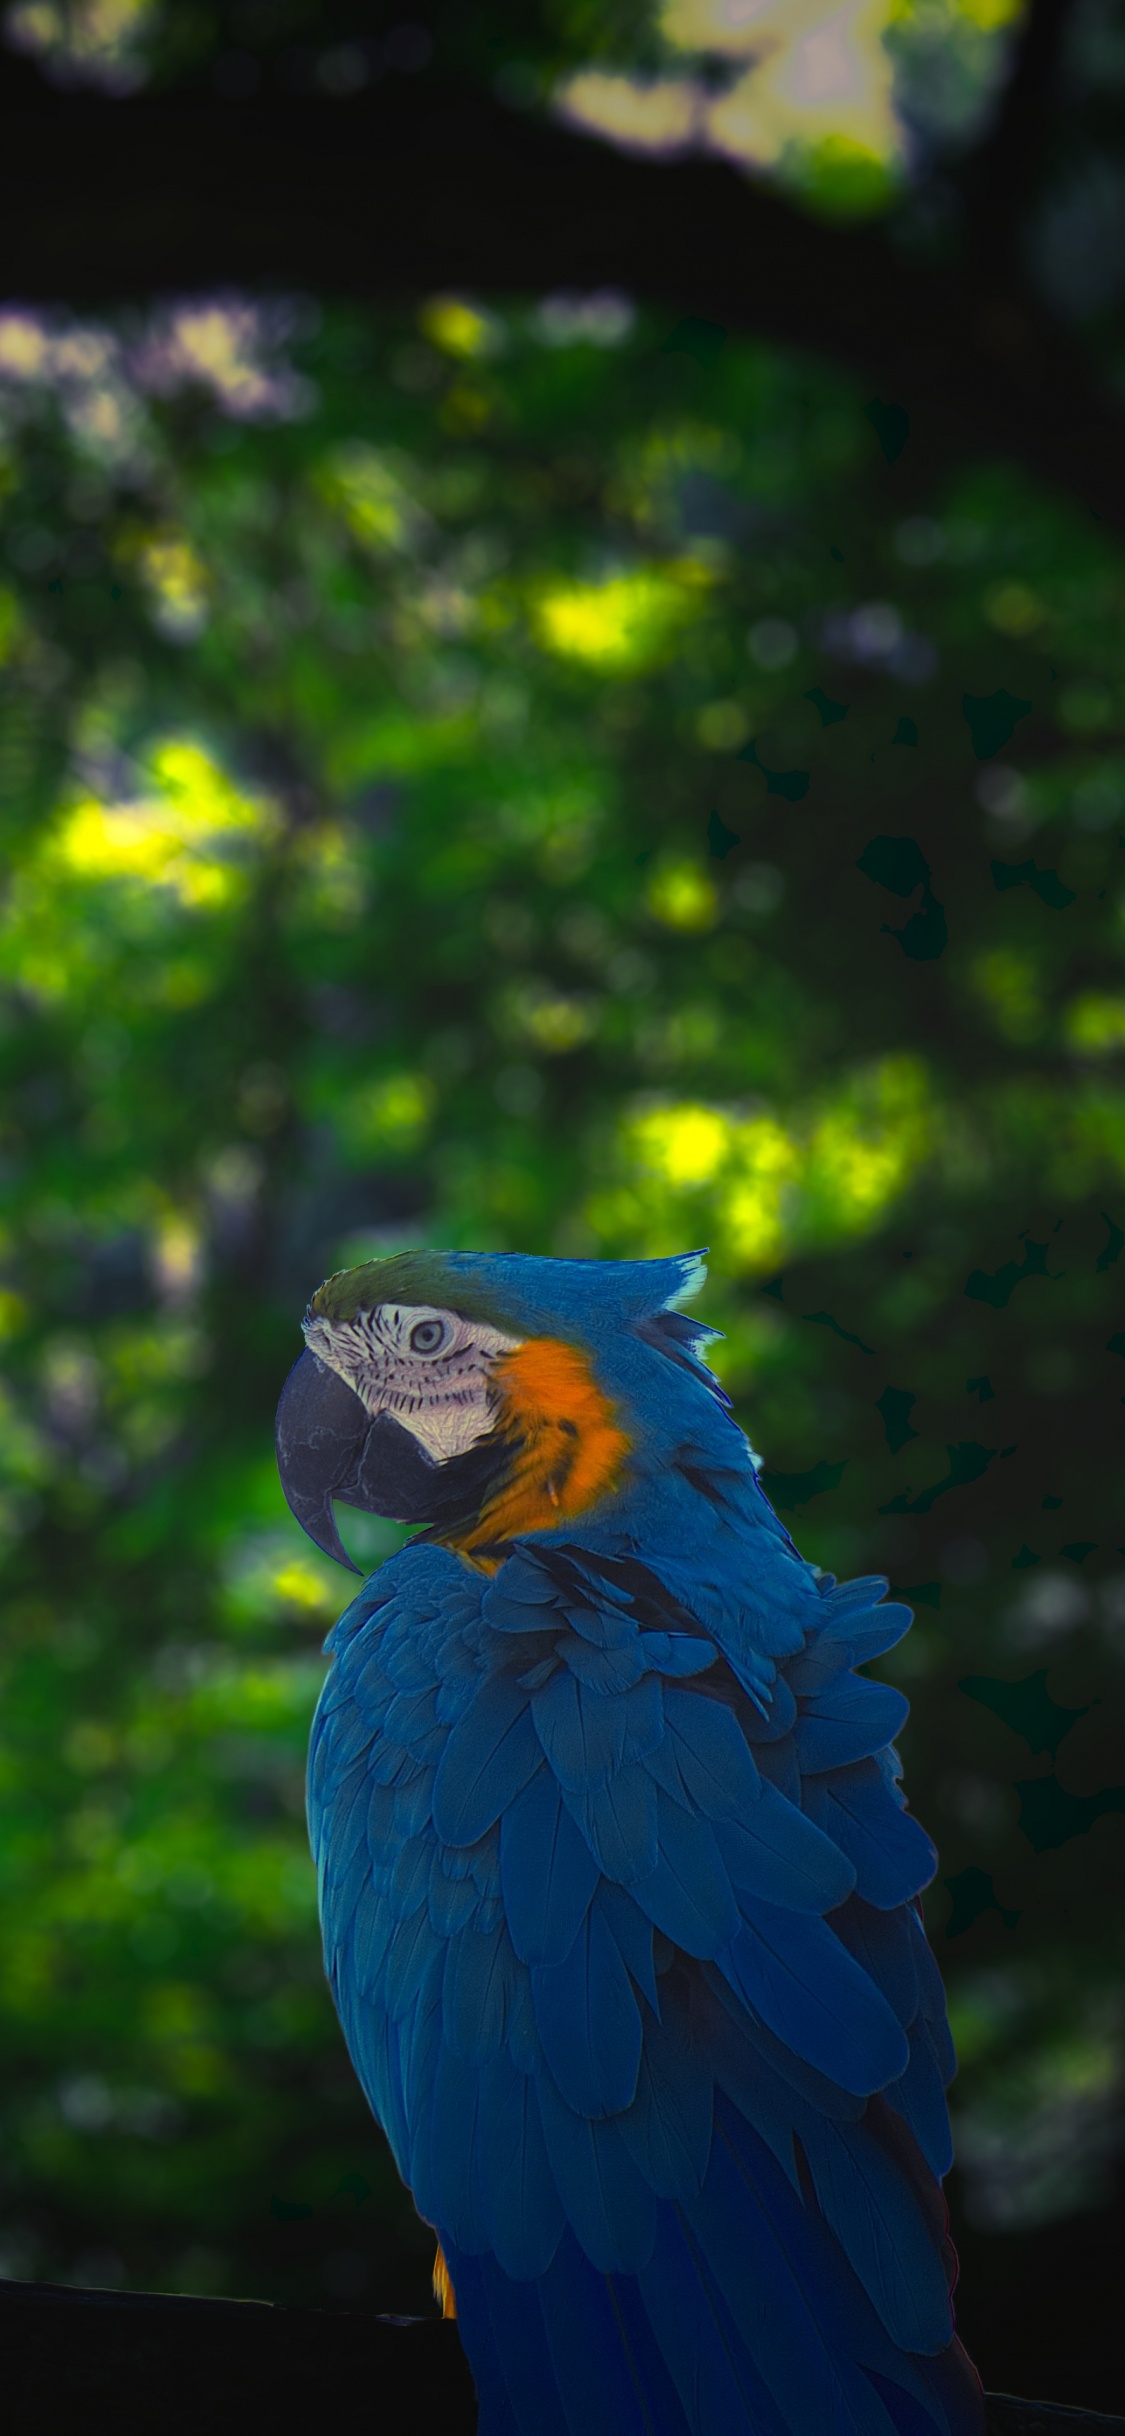 Blue and Yellow Macaw on Black Wooden Fence During Daytime. Wallpaper in 1125x2436 Resolution